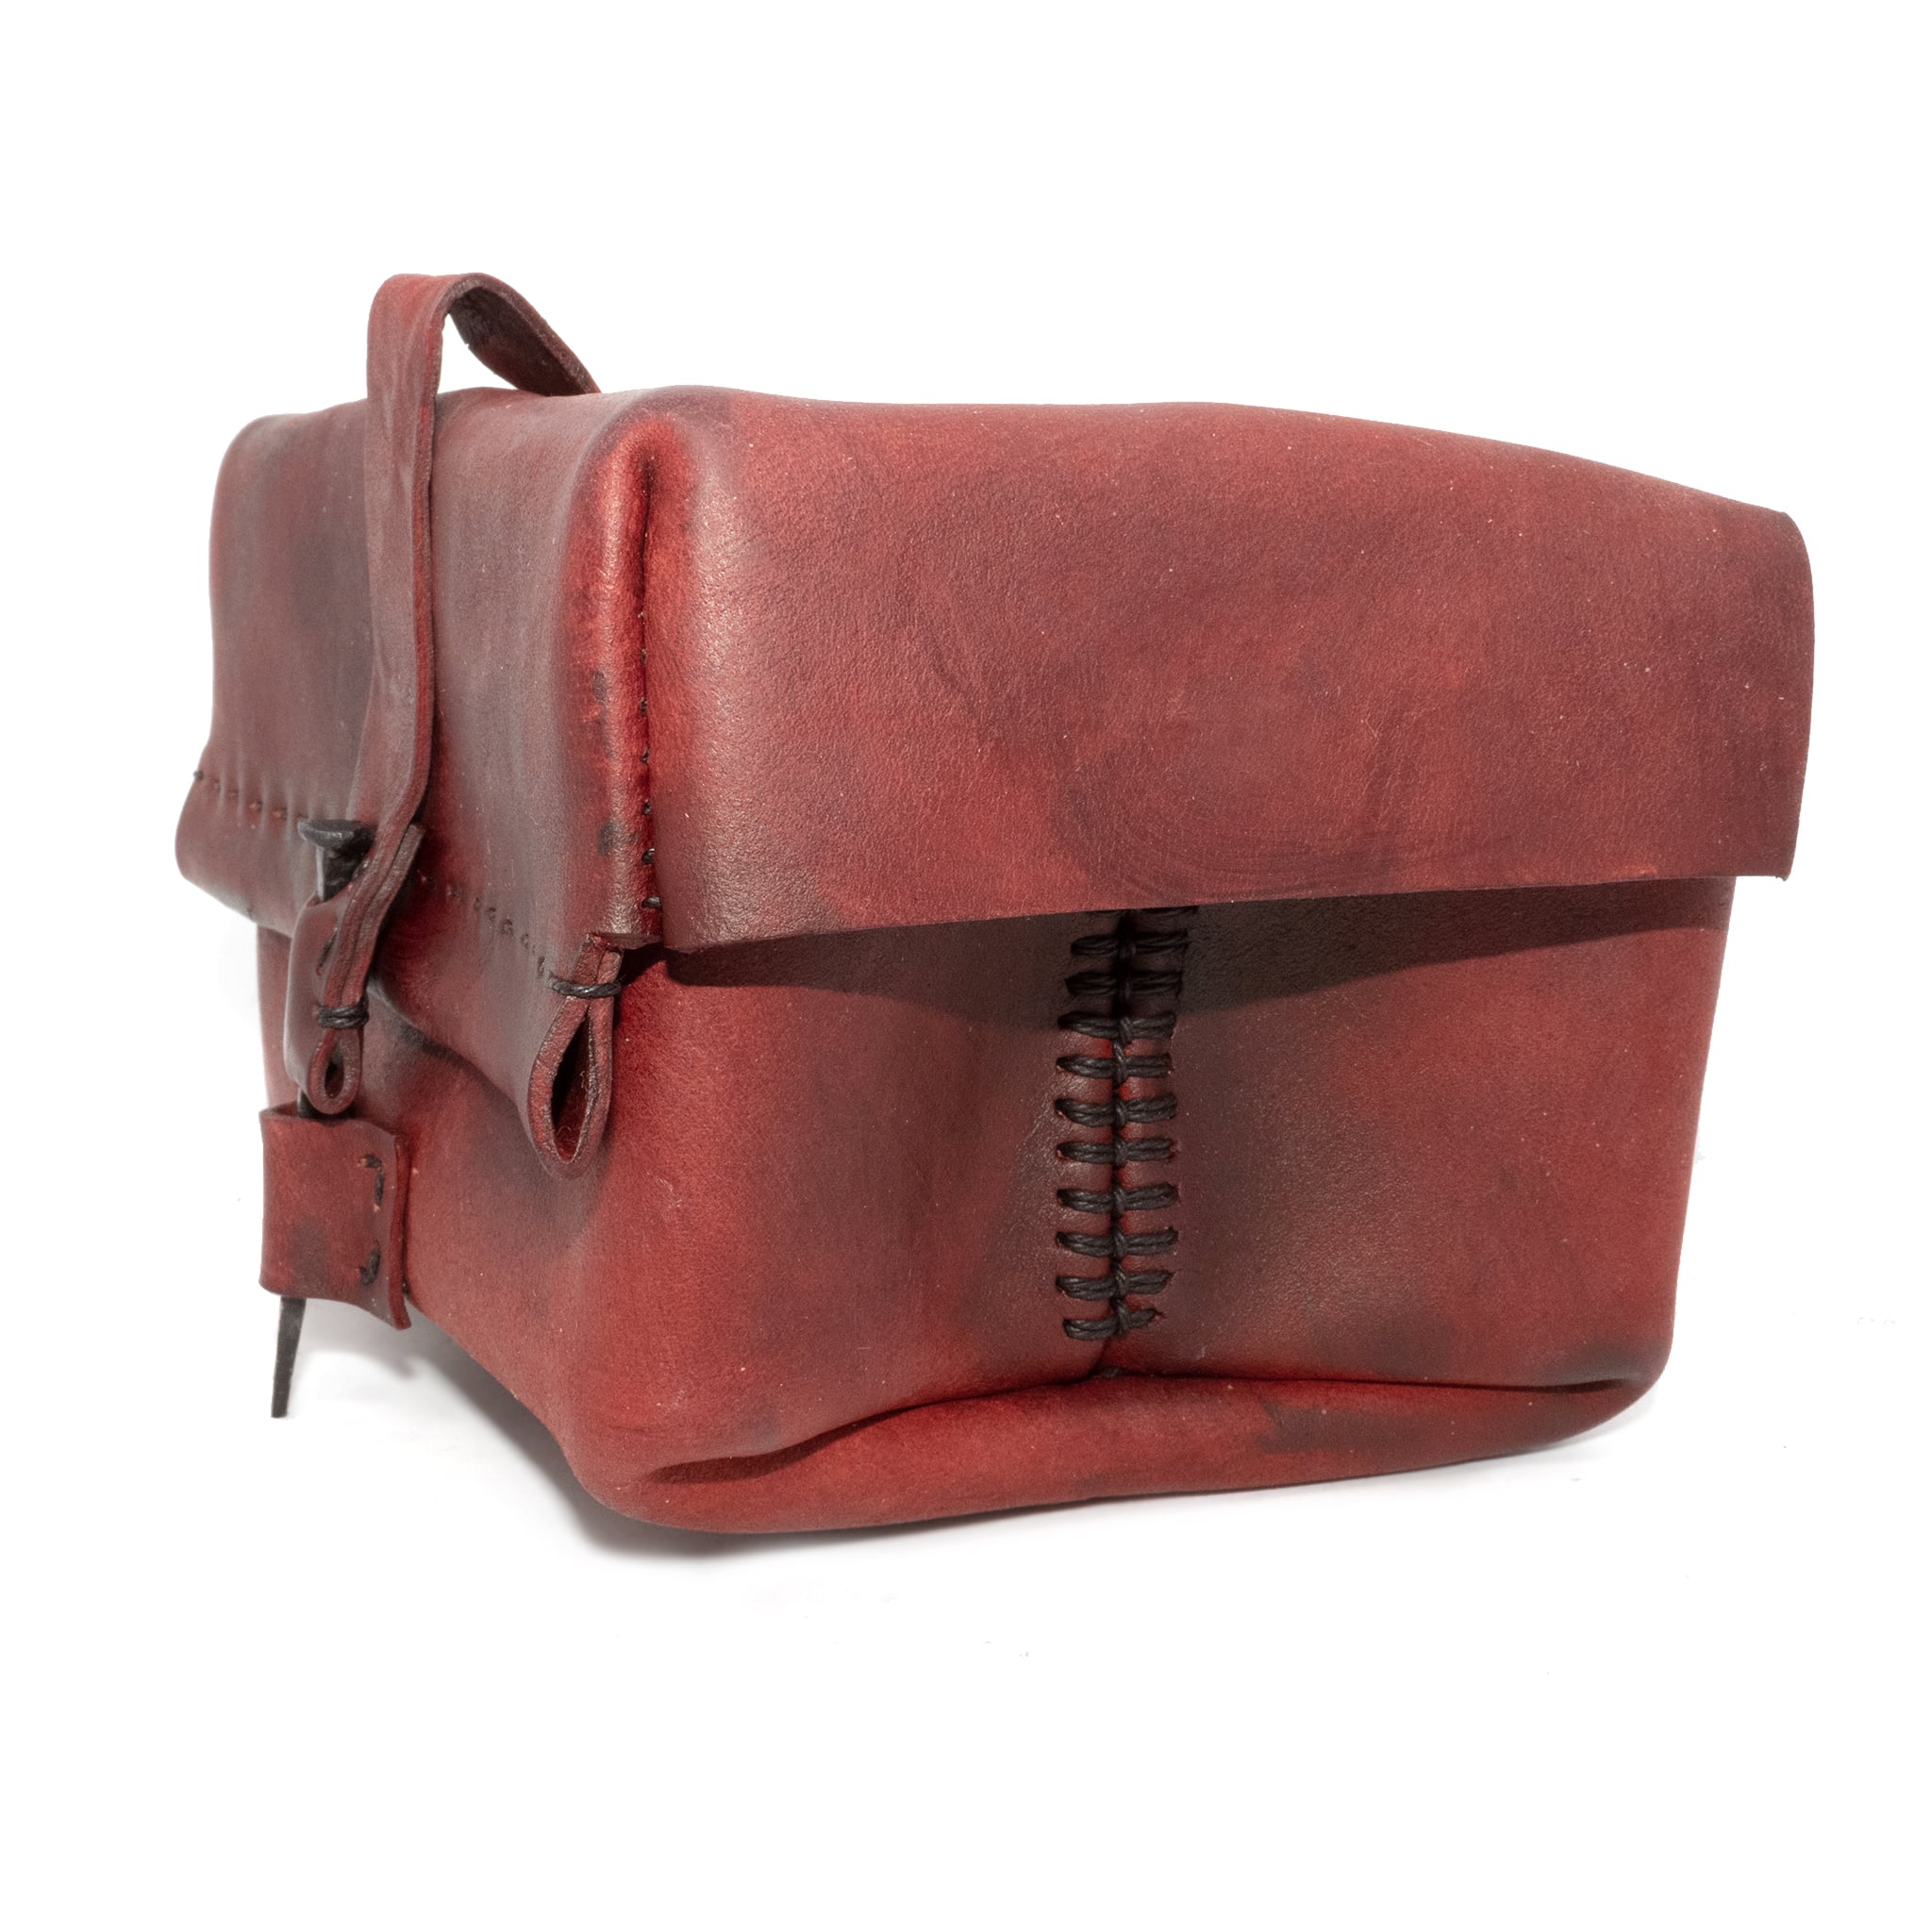 unisex hand dyed leather vanity case from atelier skn.